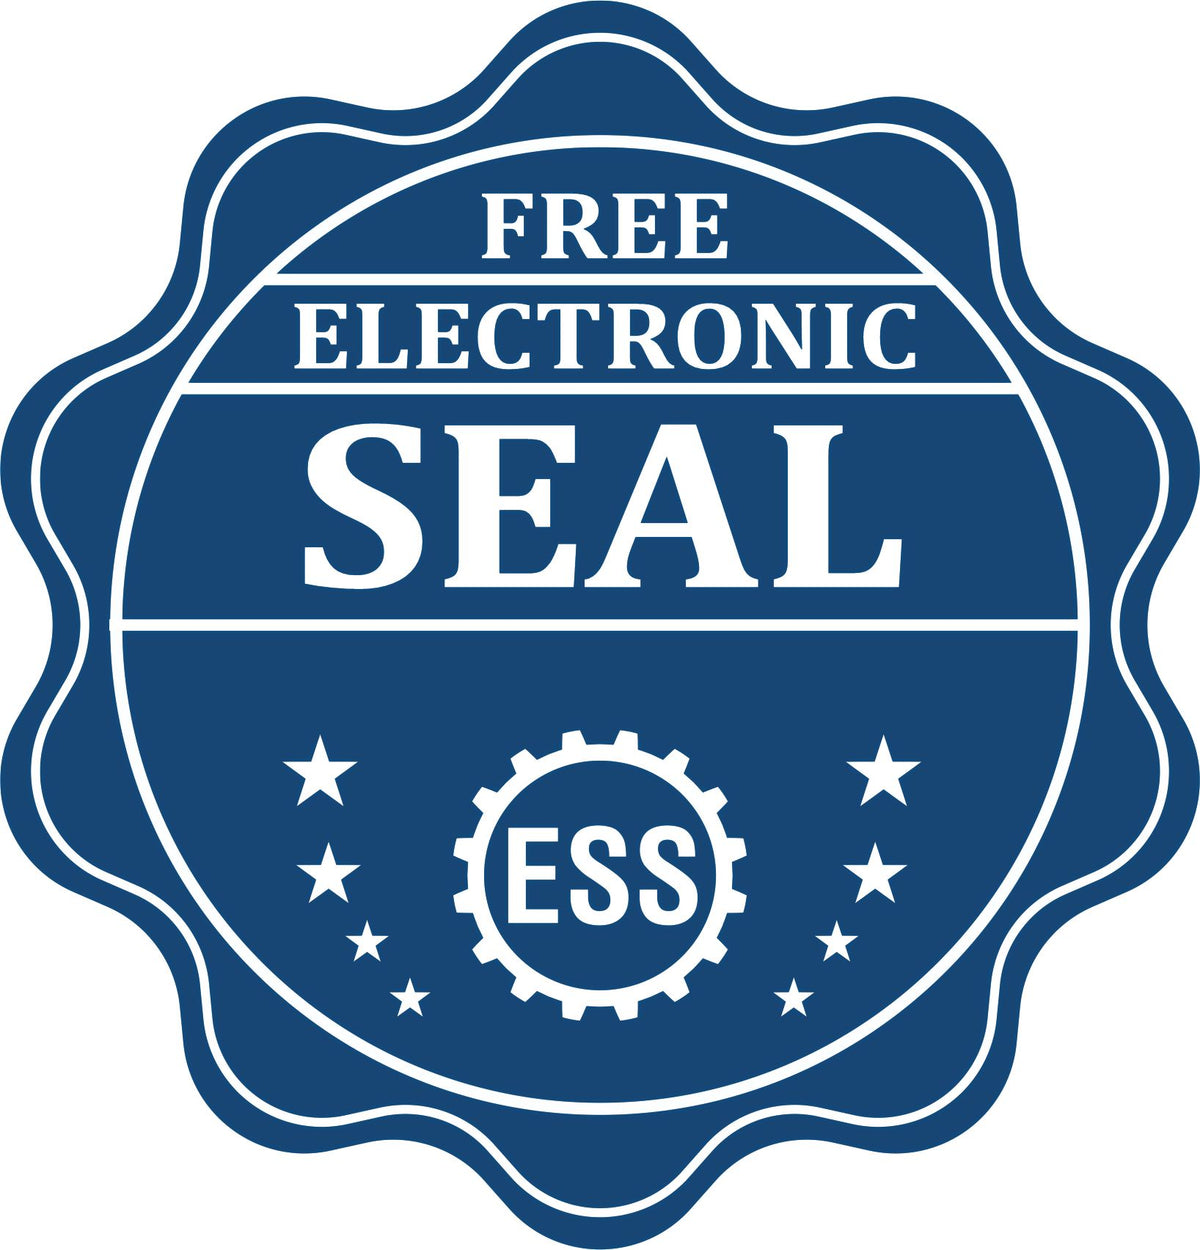 A badge showing a free electronic seal for the Handheld Massachusetts Land Surveyor Seal with stars and the ESS gear on the emblem.